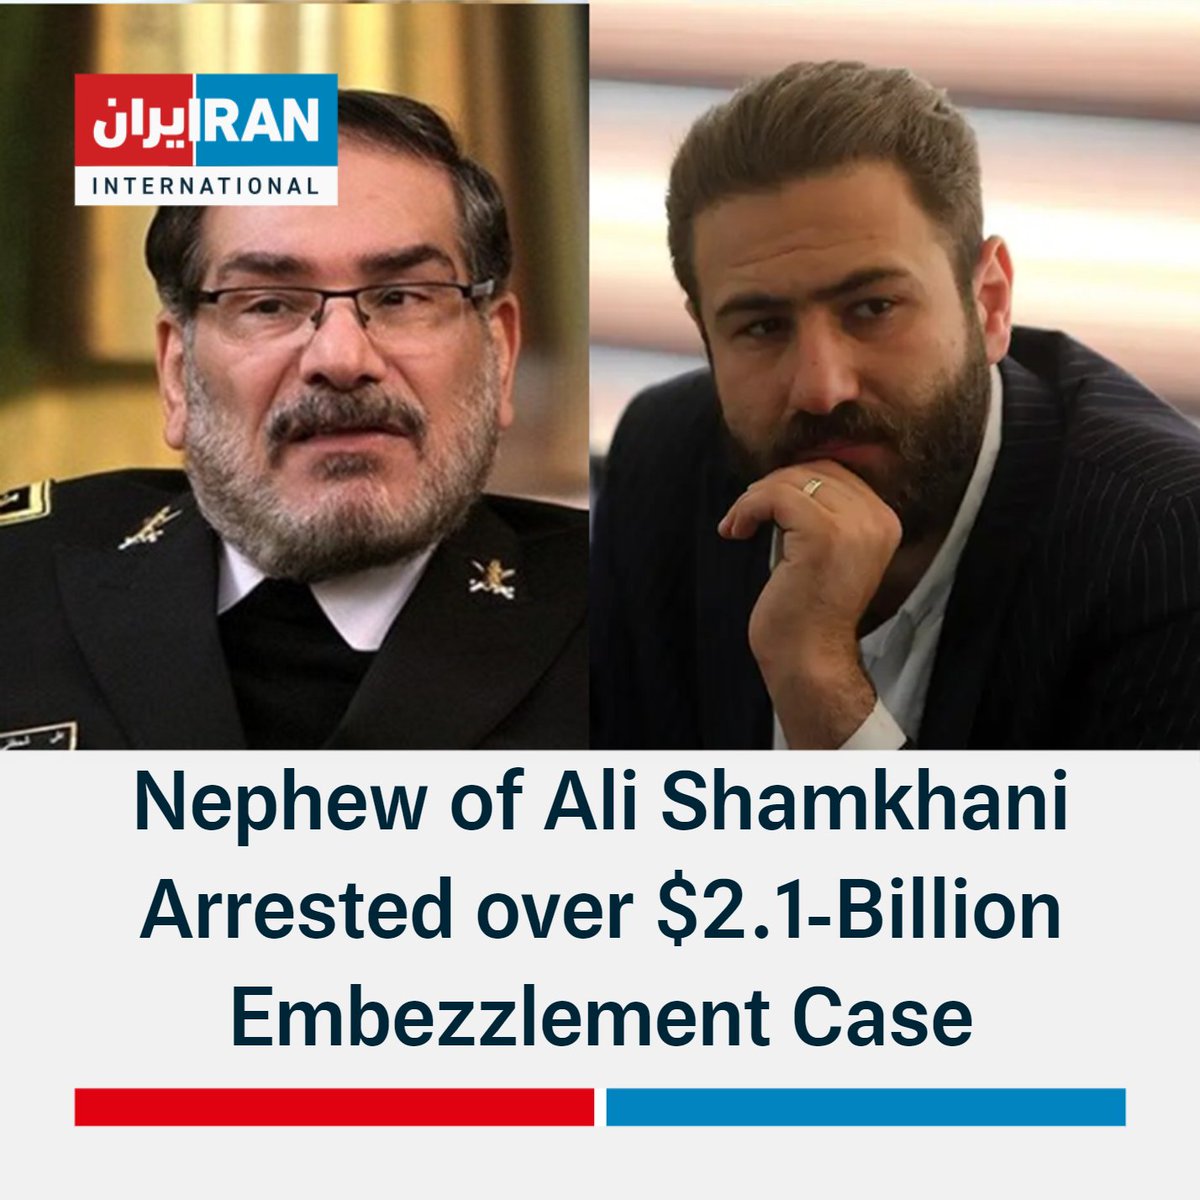 Mo'oud Shamkhani, the former deputy head of Iran's Arvand Free Zone and nephew of former SNSC Secretary Ali Shamkhani, has been arrested in Abadan on charge of financial corruption. He is implicated in a $2.1-billion embezzlement case, according to media reports. In recent years,…